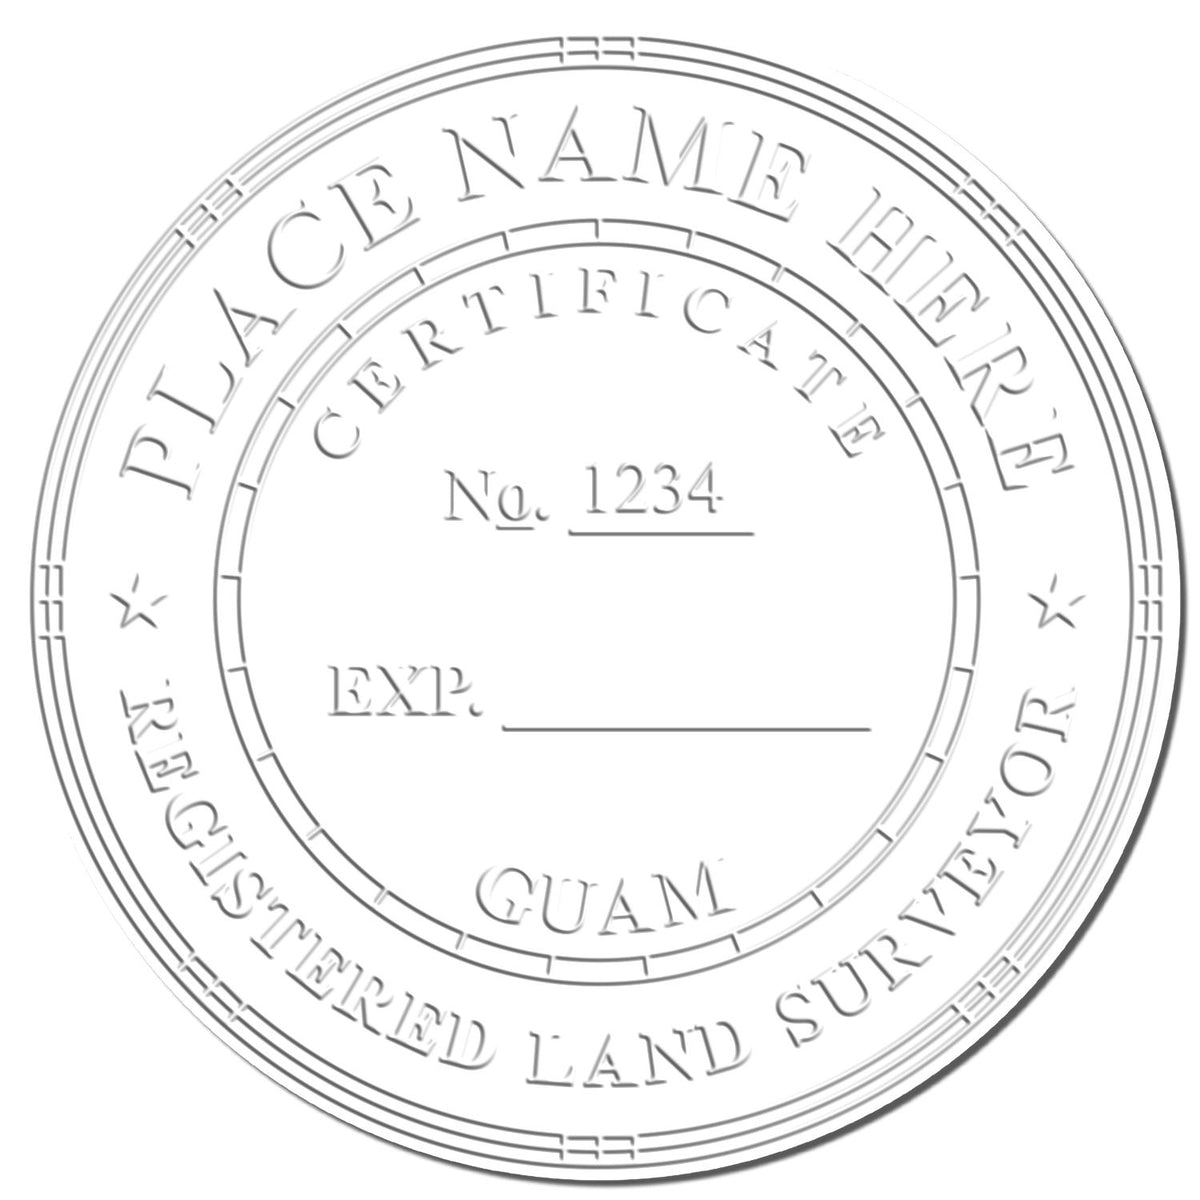 This paper is stamped with a sample imprint of the Handheld Guam Land Surveyor Seal, signifying its quality and reliability.